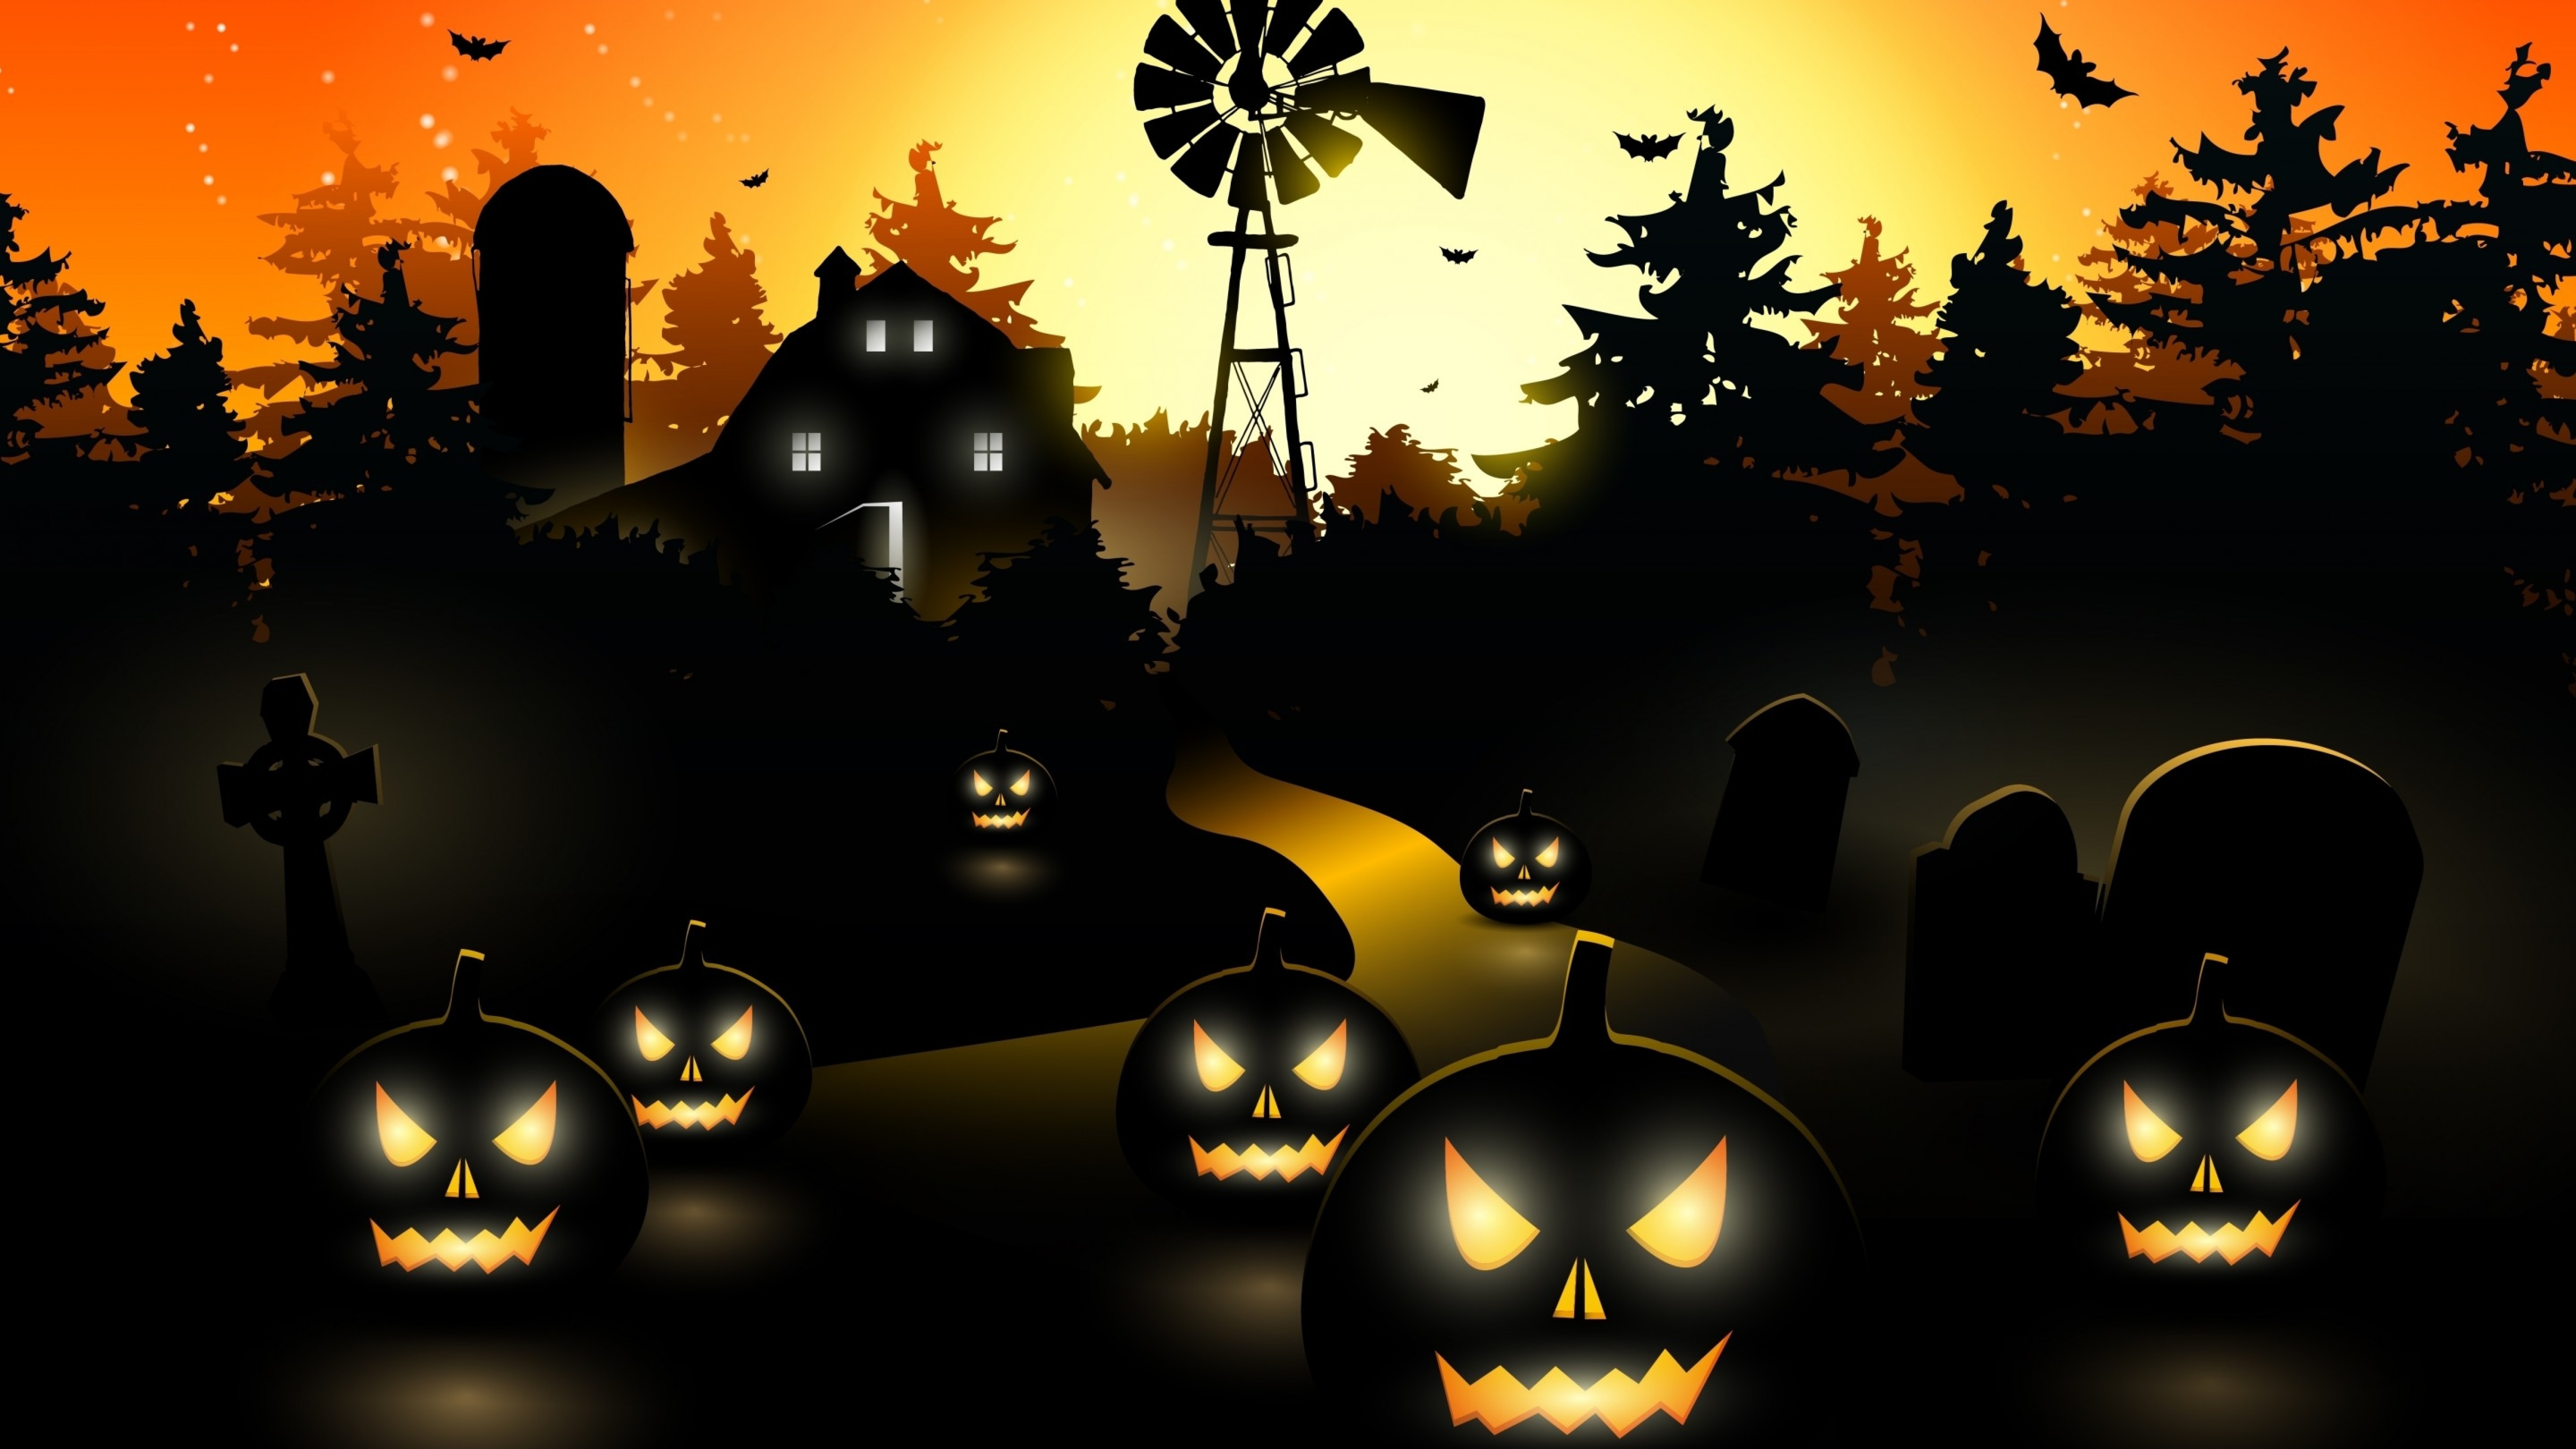 Download Halloween Haunted House 1920x1080 Resolution ...